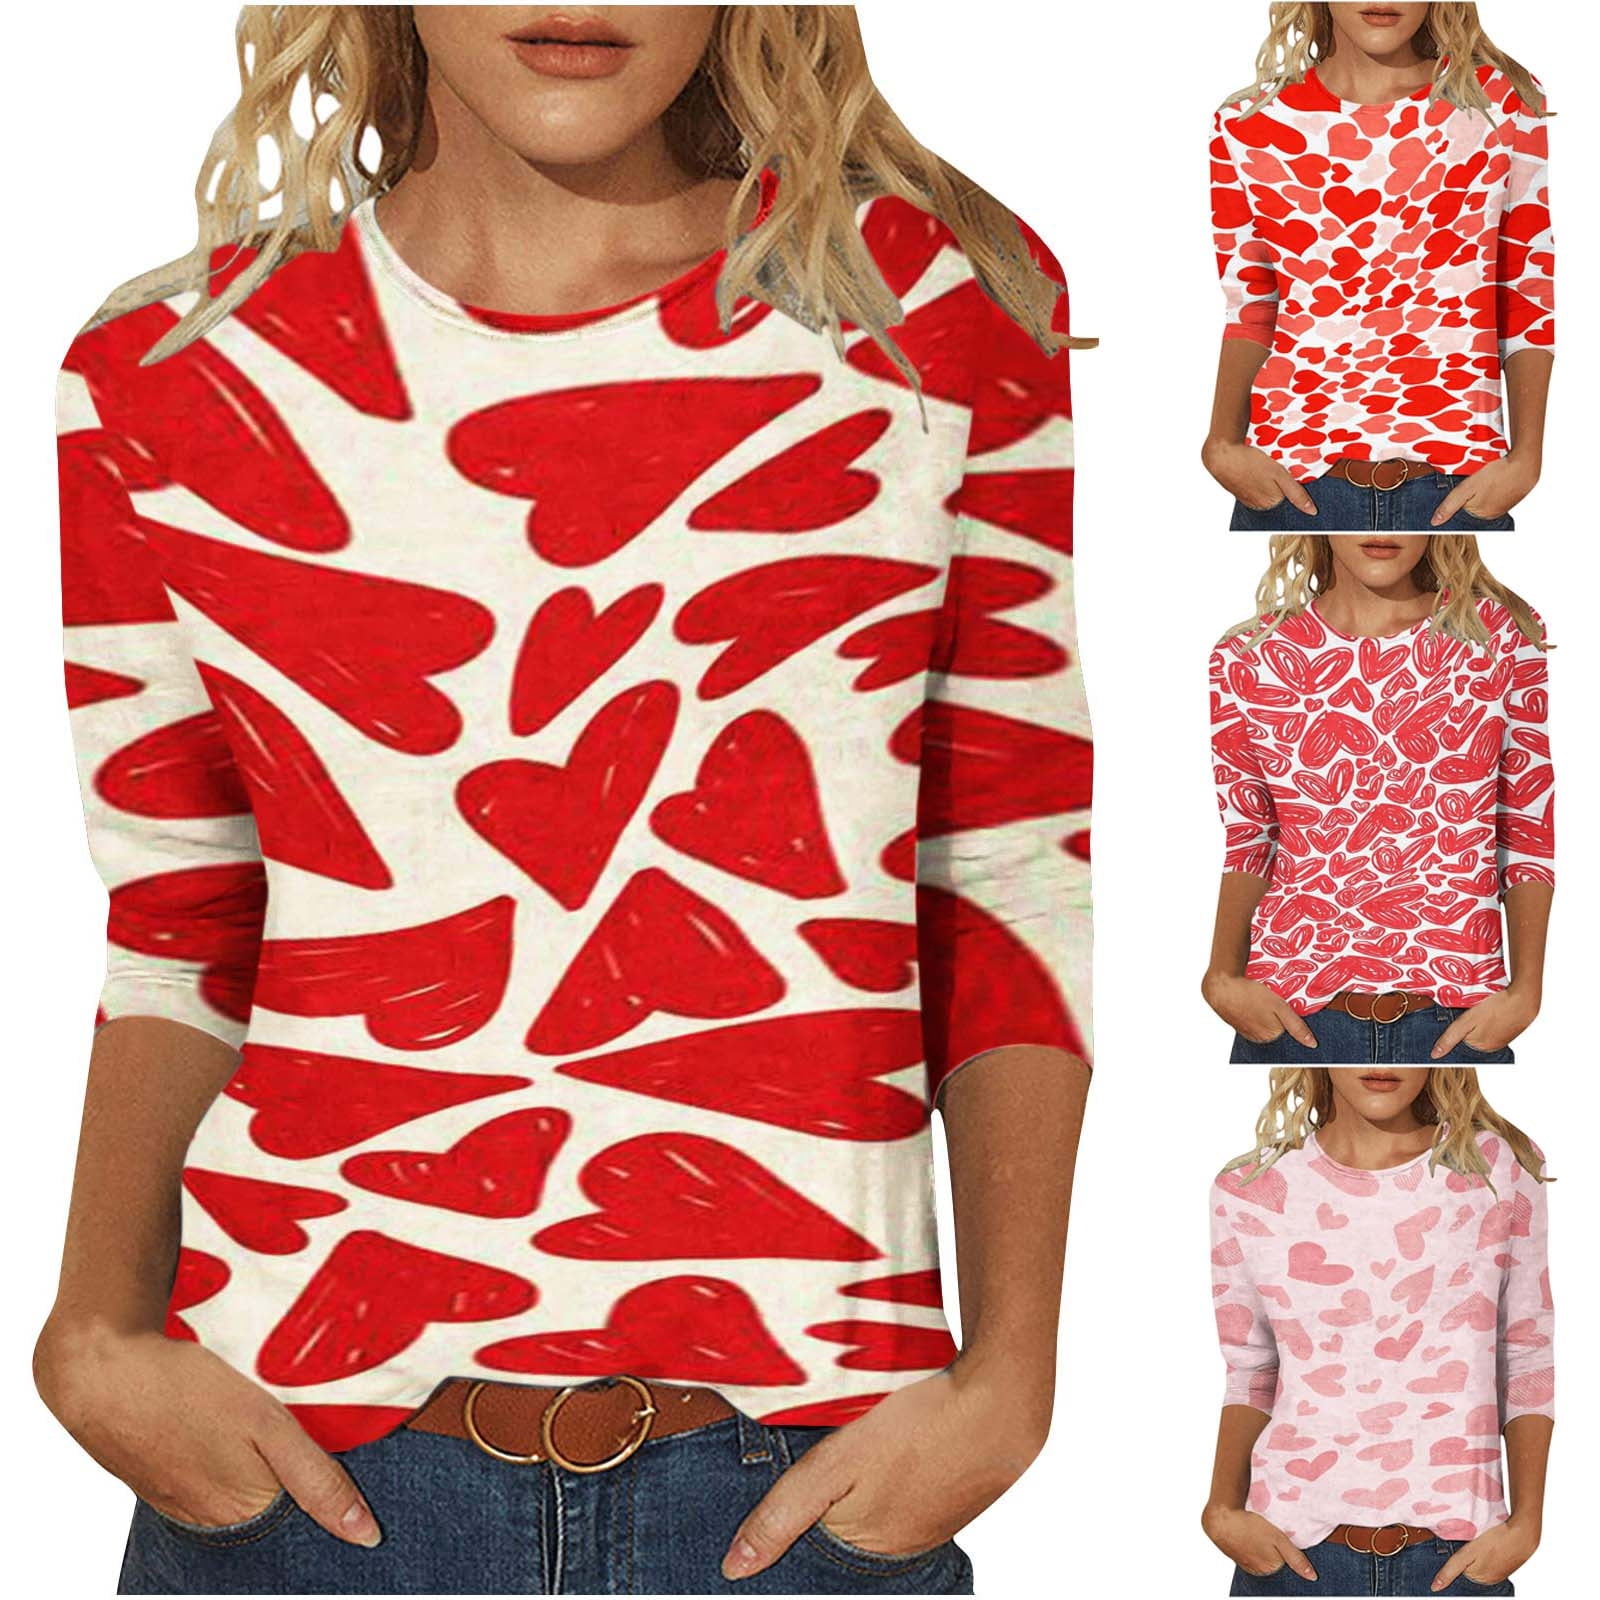 Valentines Day Deals AKAFMK Long Sleeve Shirts for Women,Plus Size Tops ...